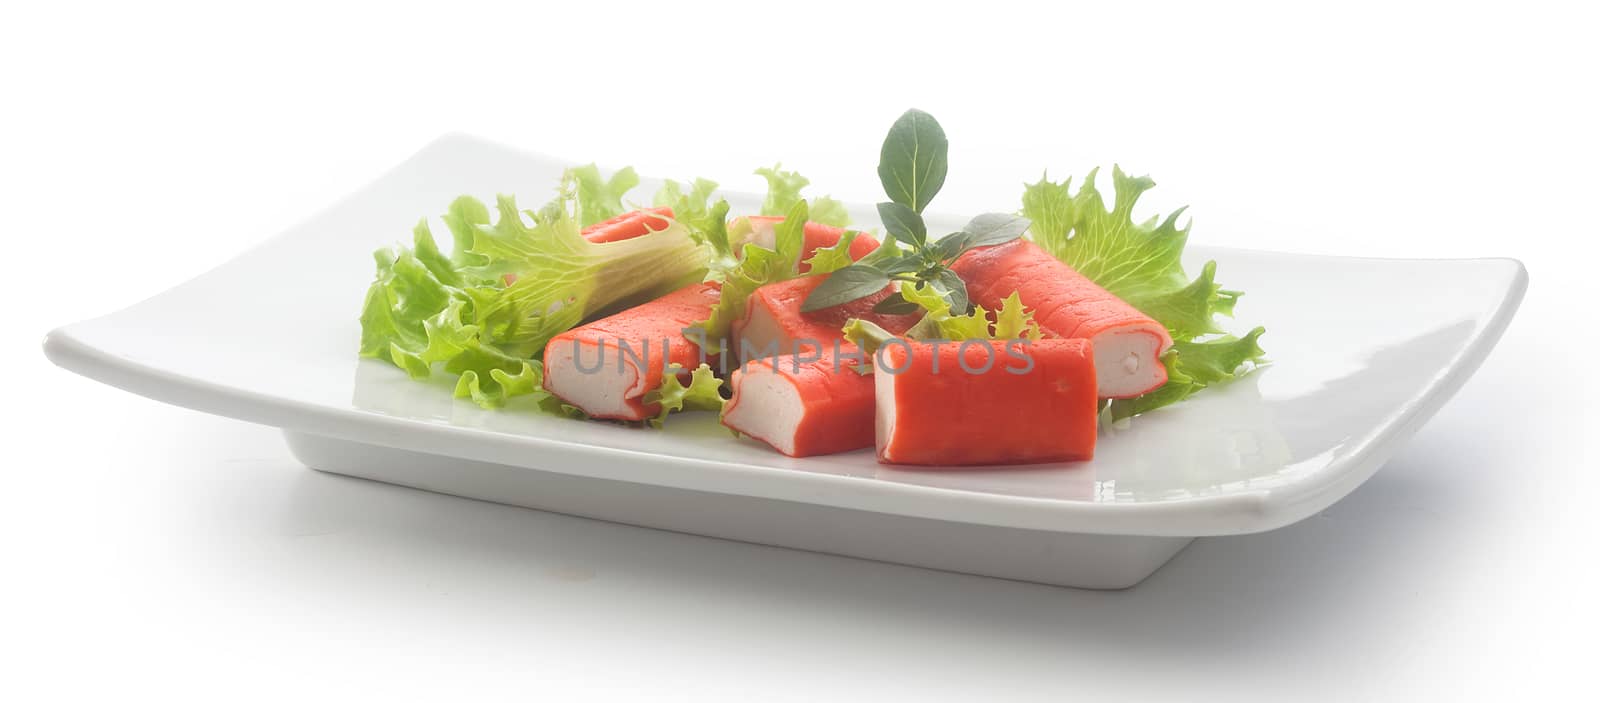 Salad with pieces of red crab stick, fresh lettuce and basil on the white plate